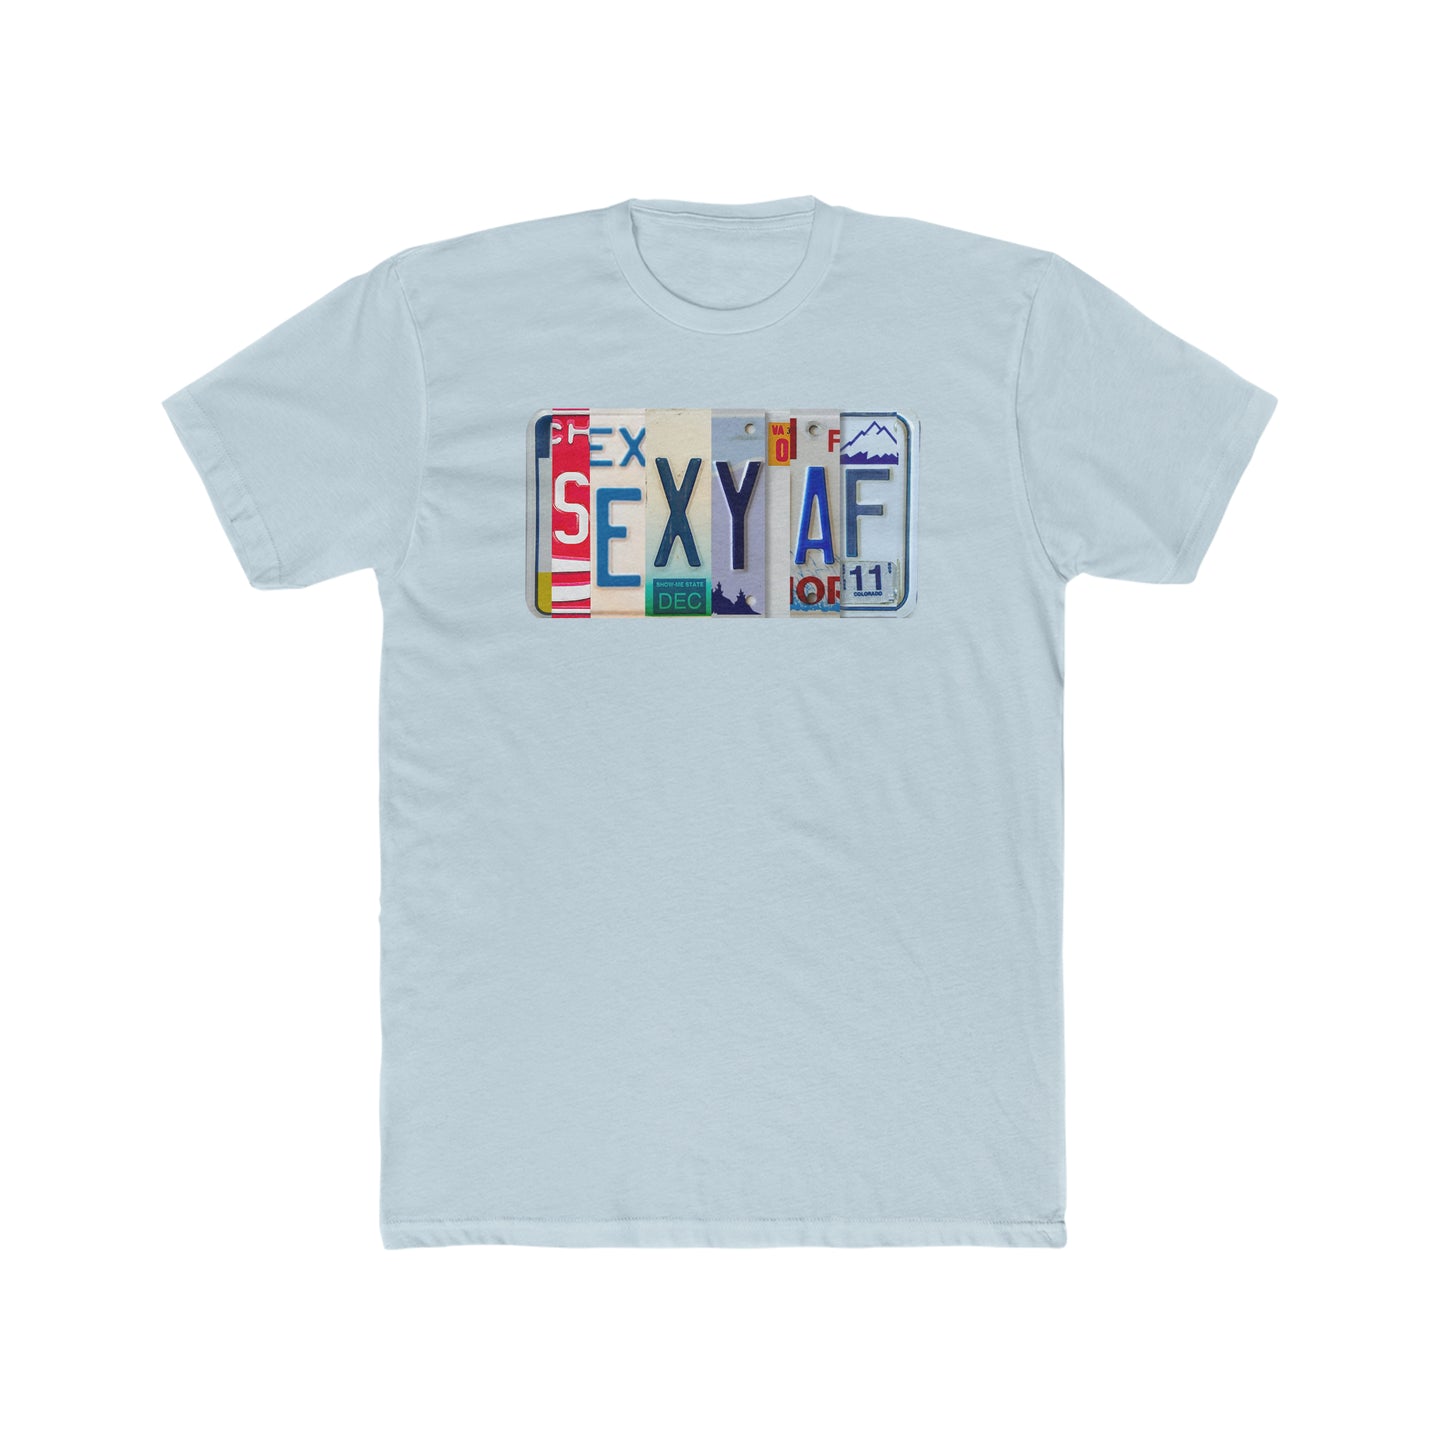 Bold 'SEXY AF' Unisex Cotton Crew Tee - Stylish and Confident Shirt.